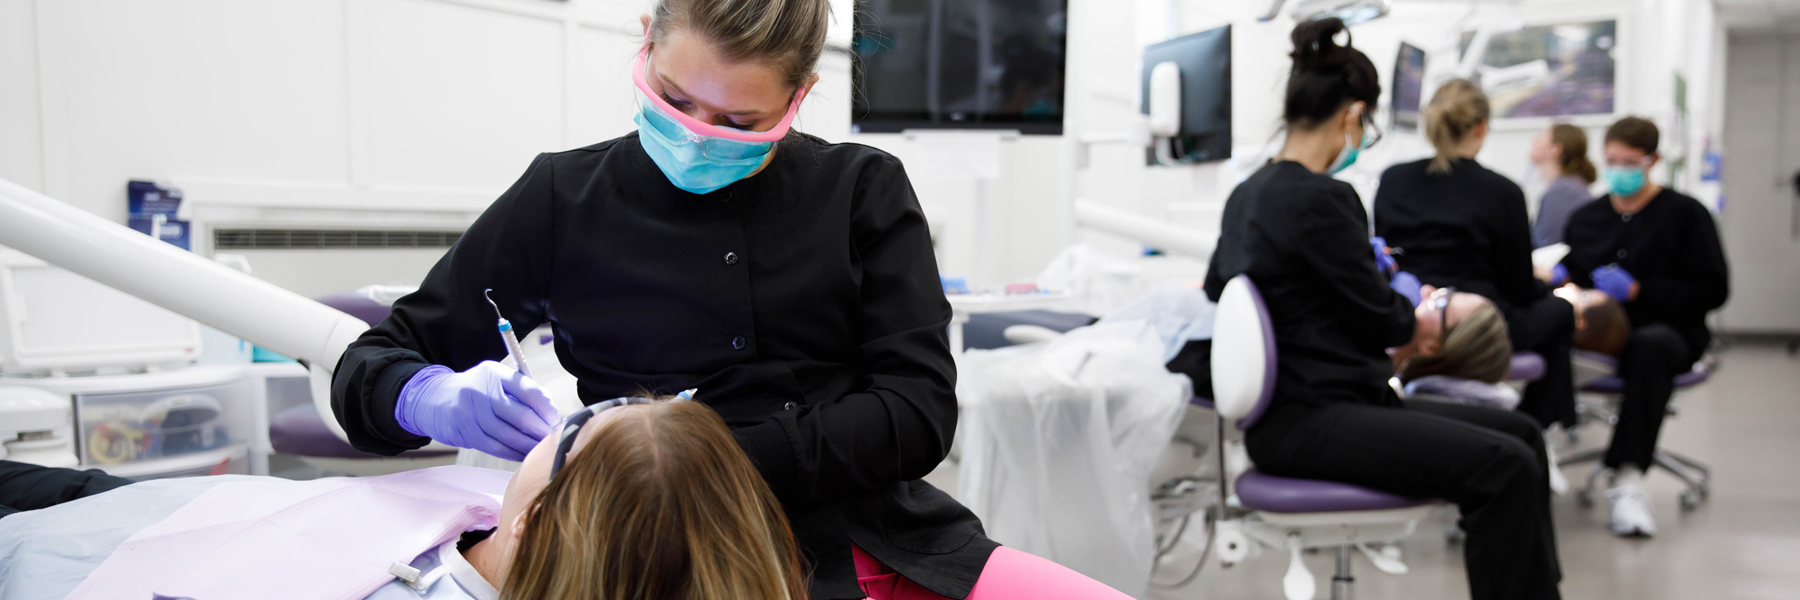 A dental hygiene student practices their technique on a patient.